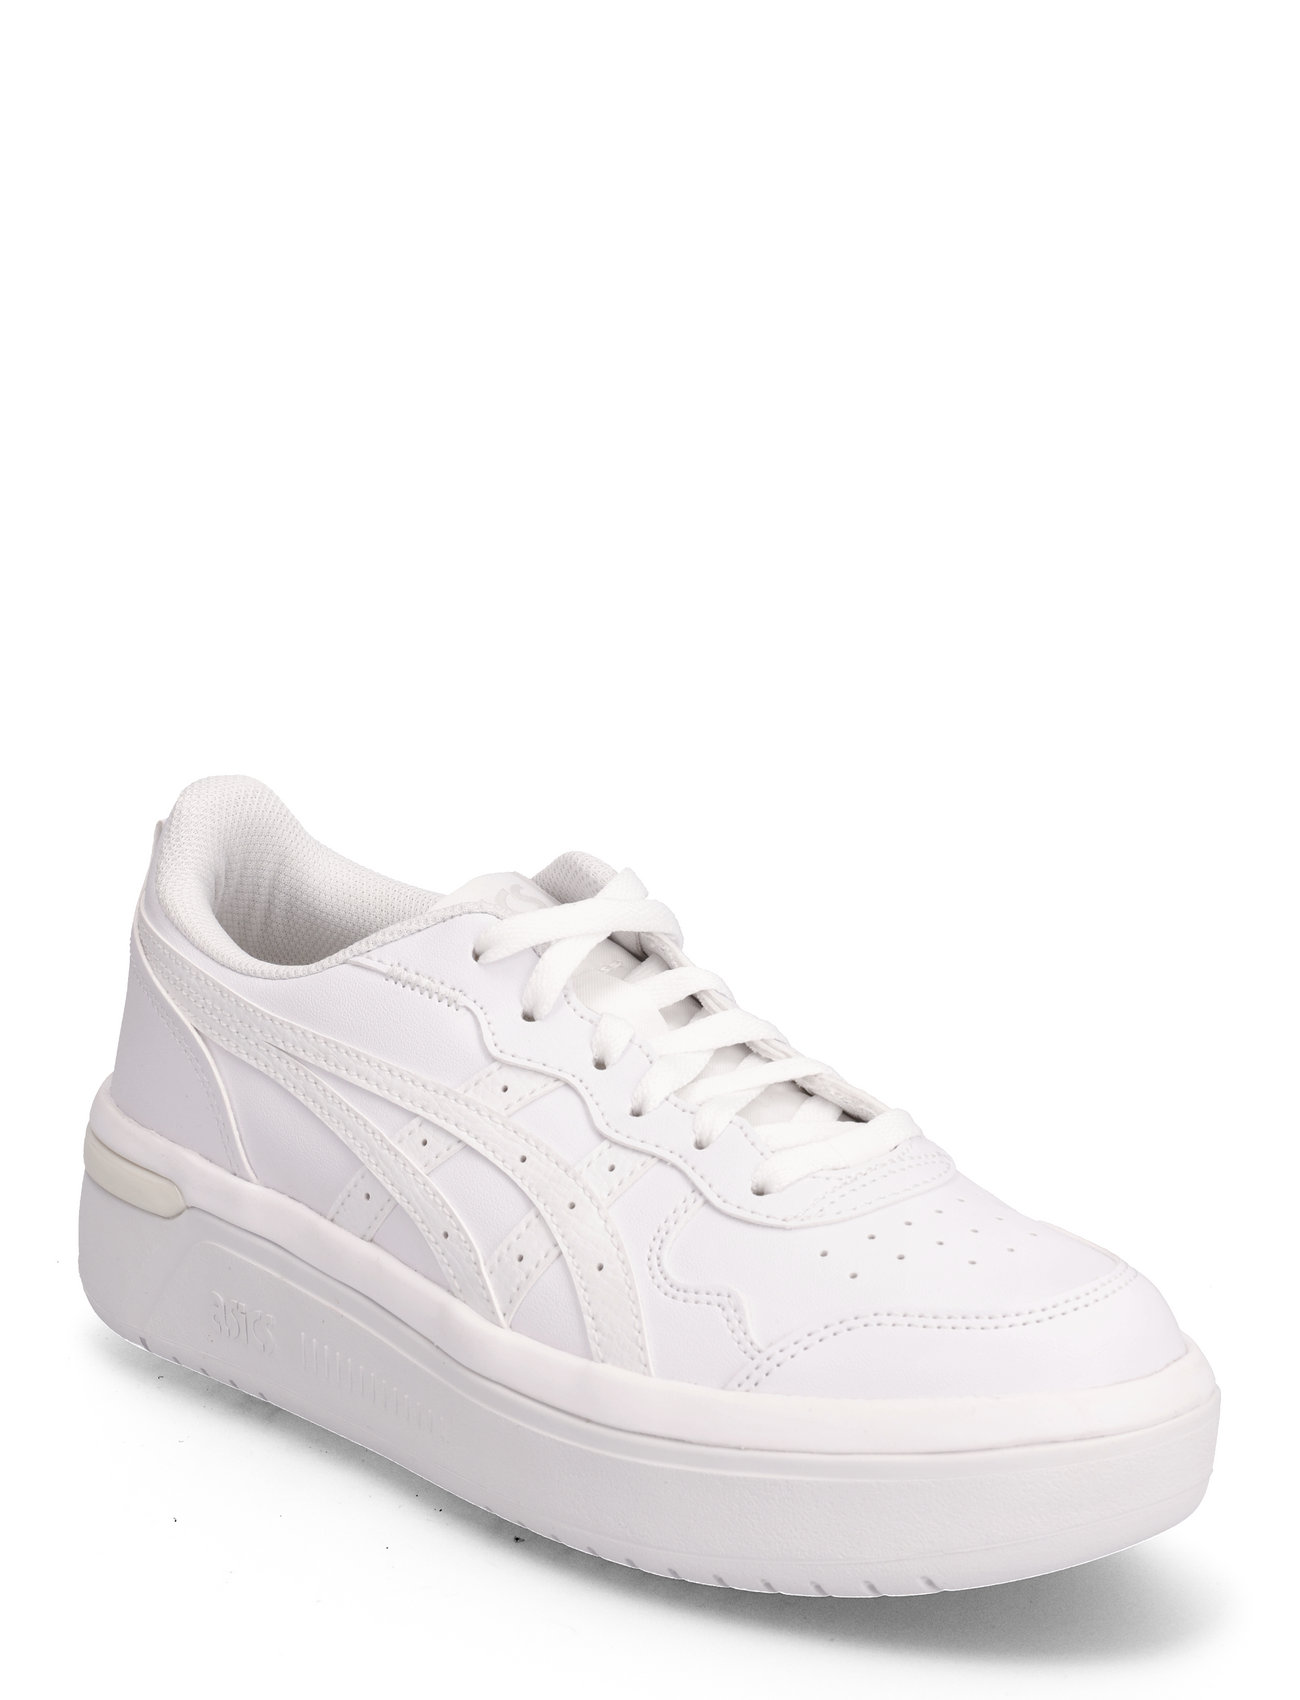 Japan S St Sport Sneakers Low-top Sneakers White Asics